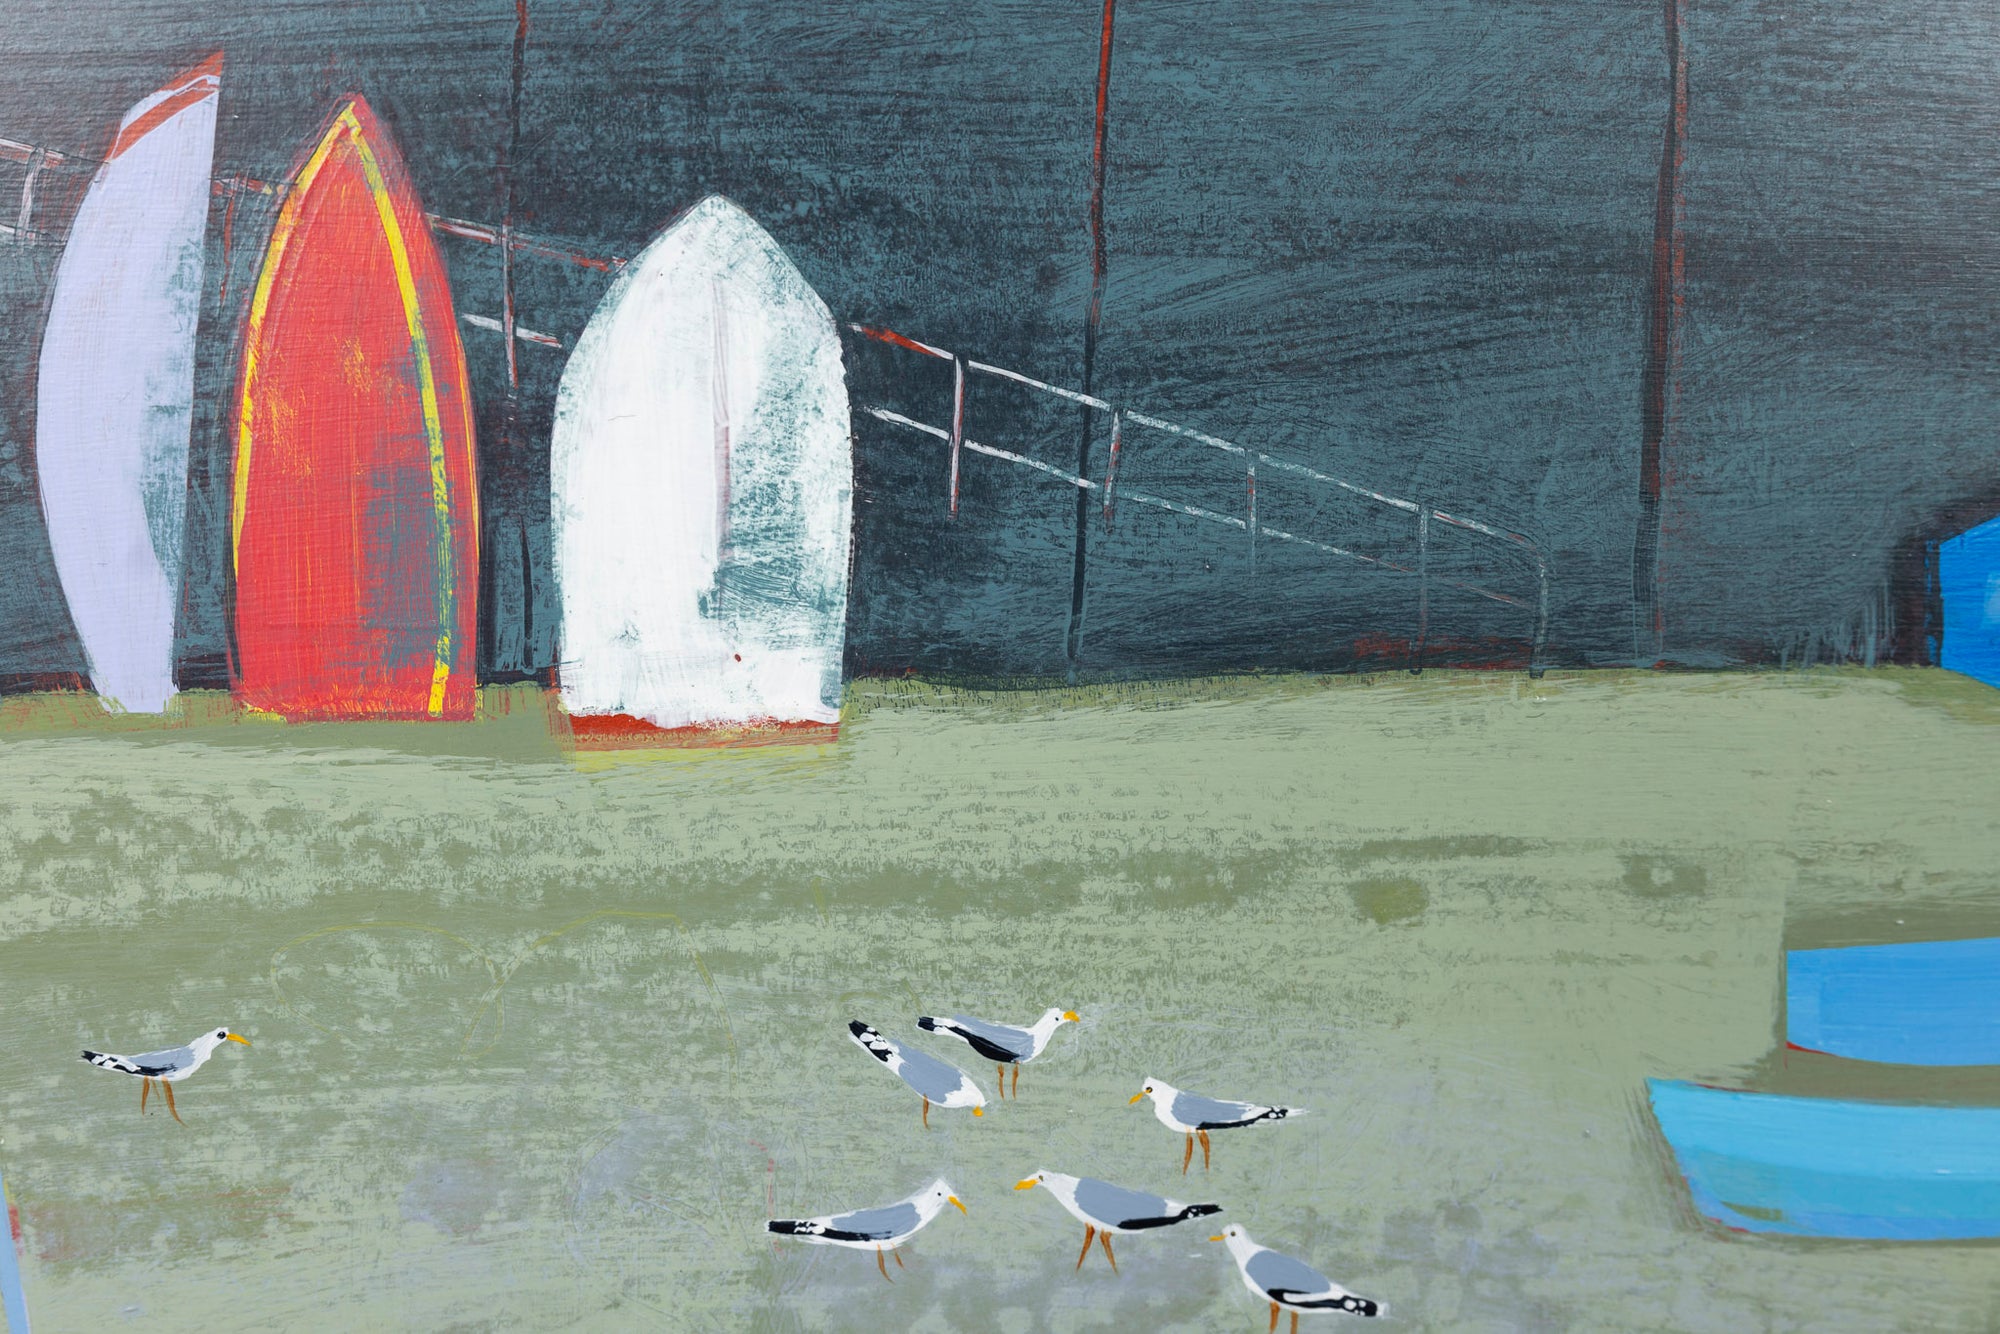 Chasing Seagulls, by Emma Dunbar, available from Padstow Gallery, Cornwall